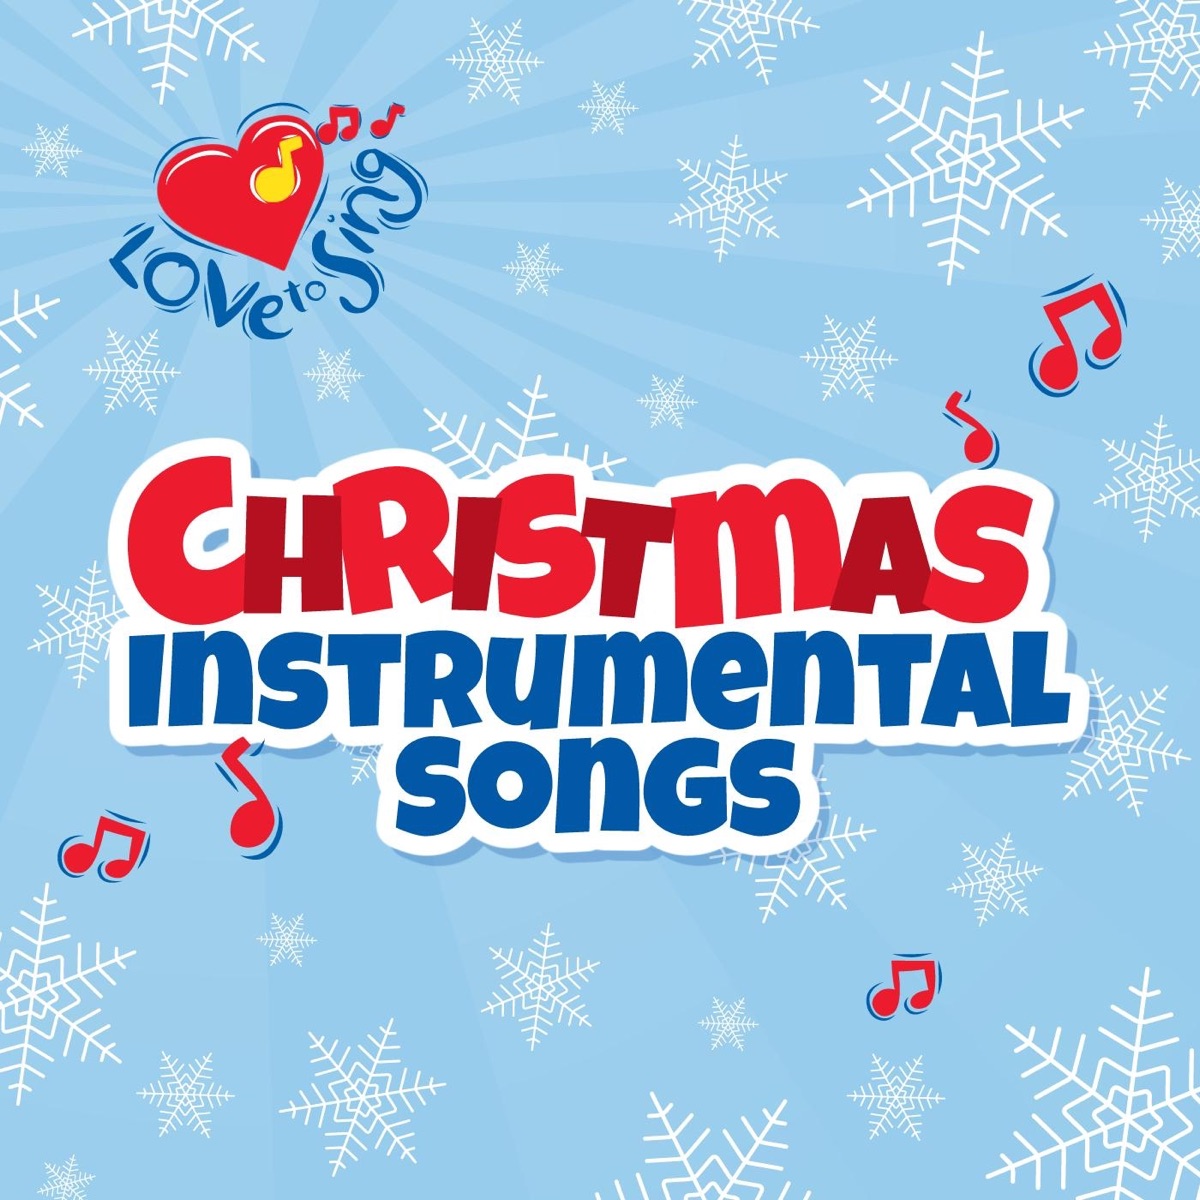 Christmas Instrumental Songs by Love to Sing on Apple Music